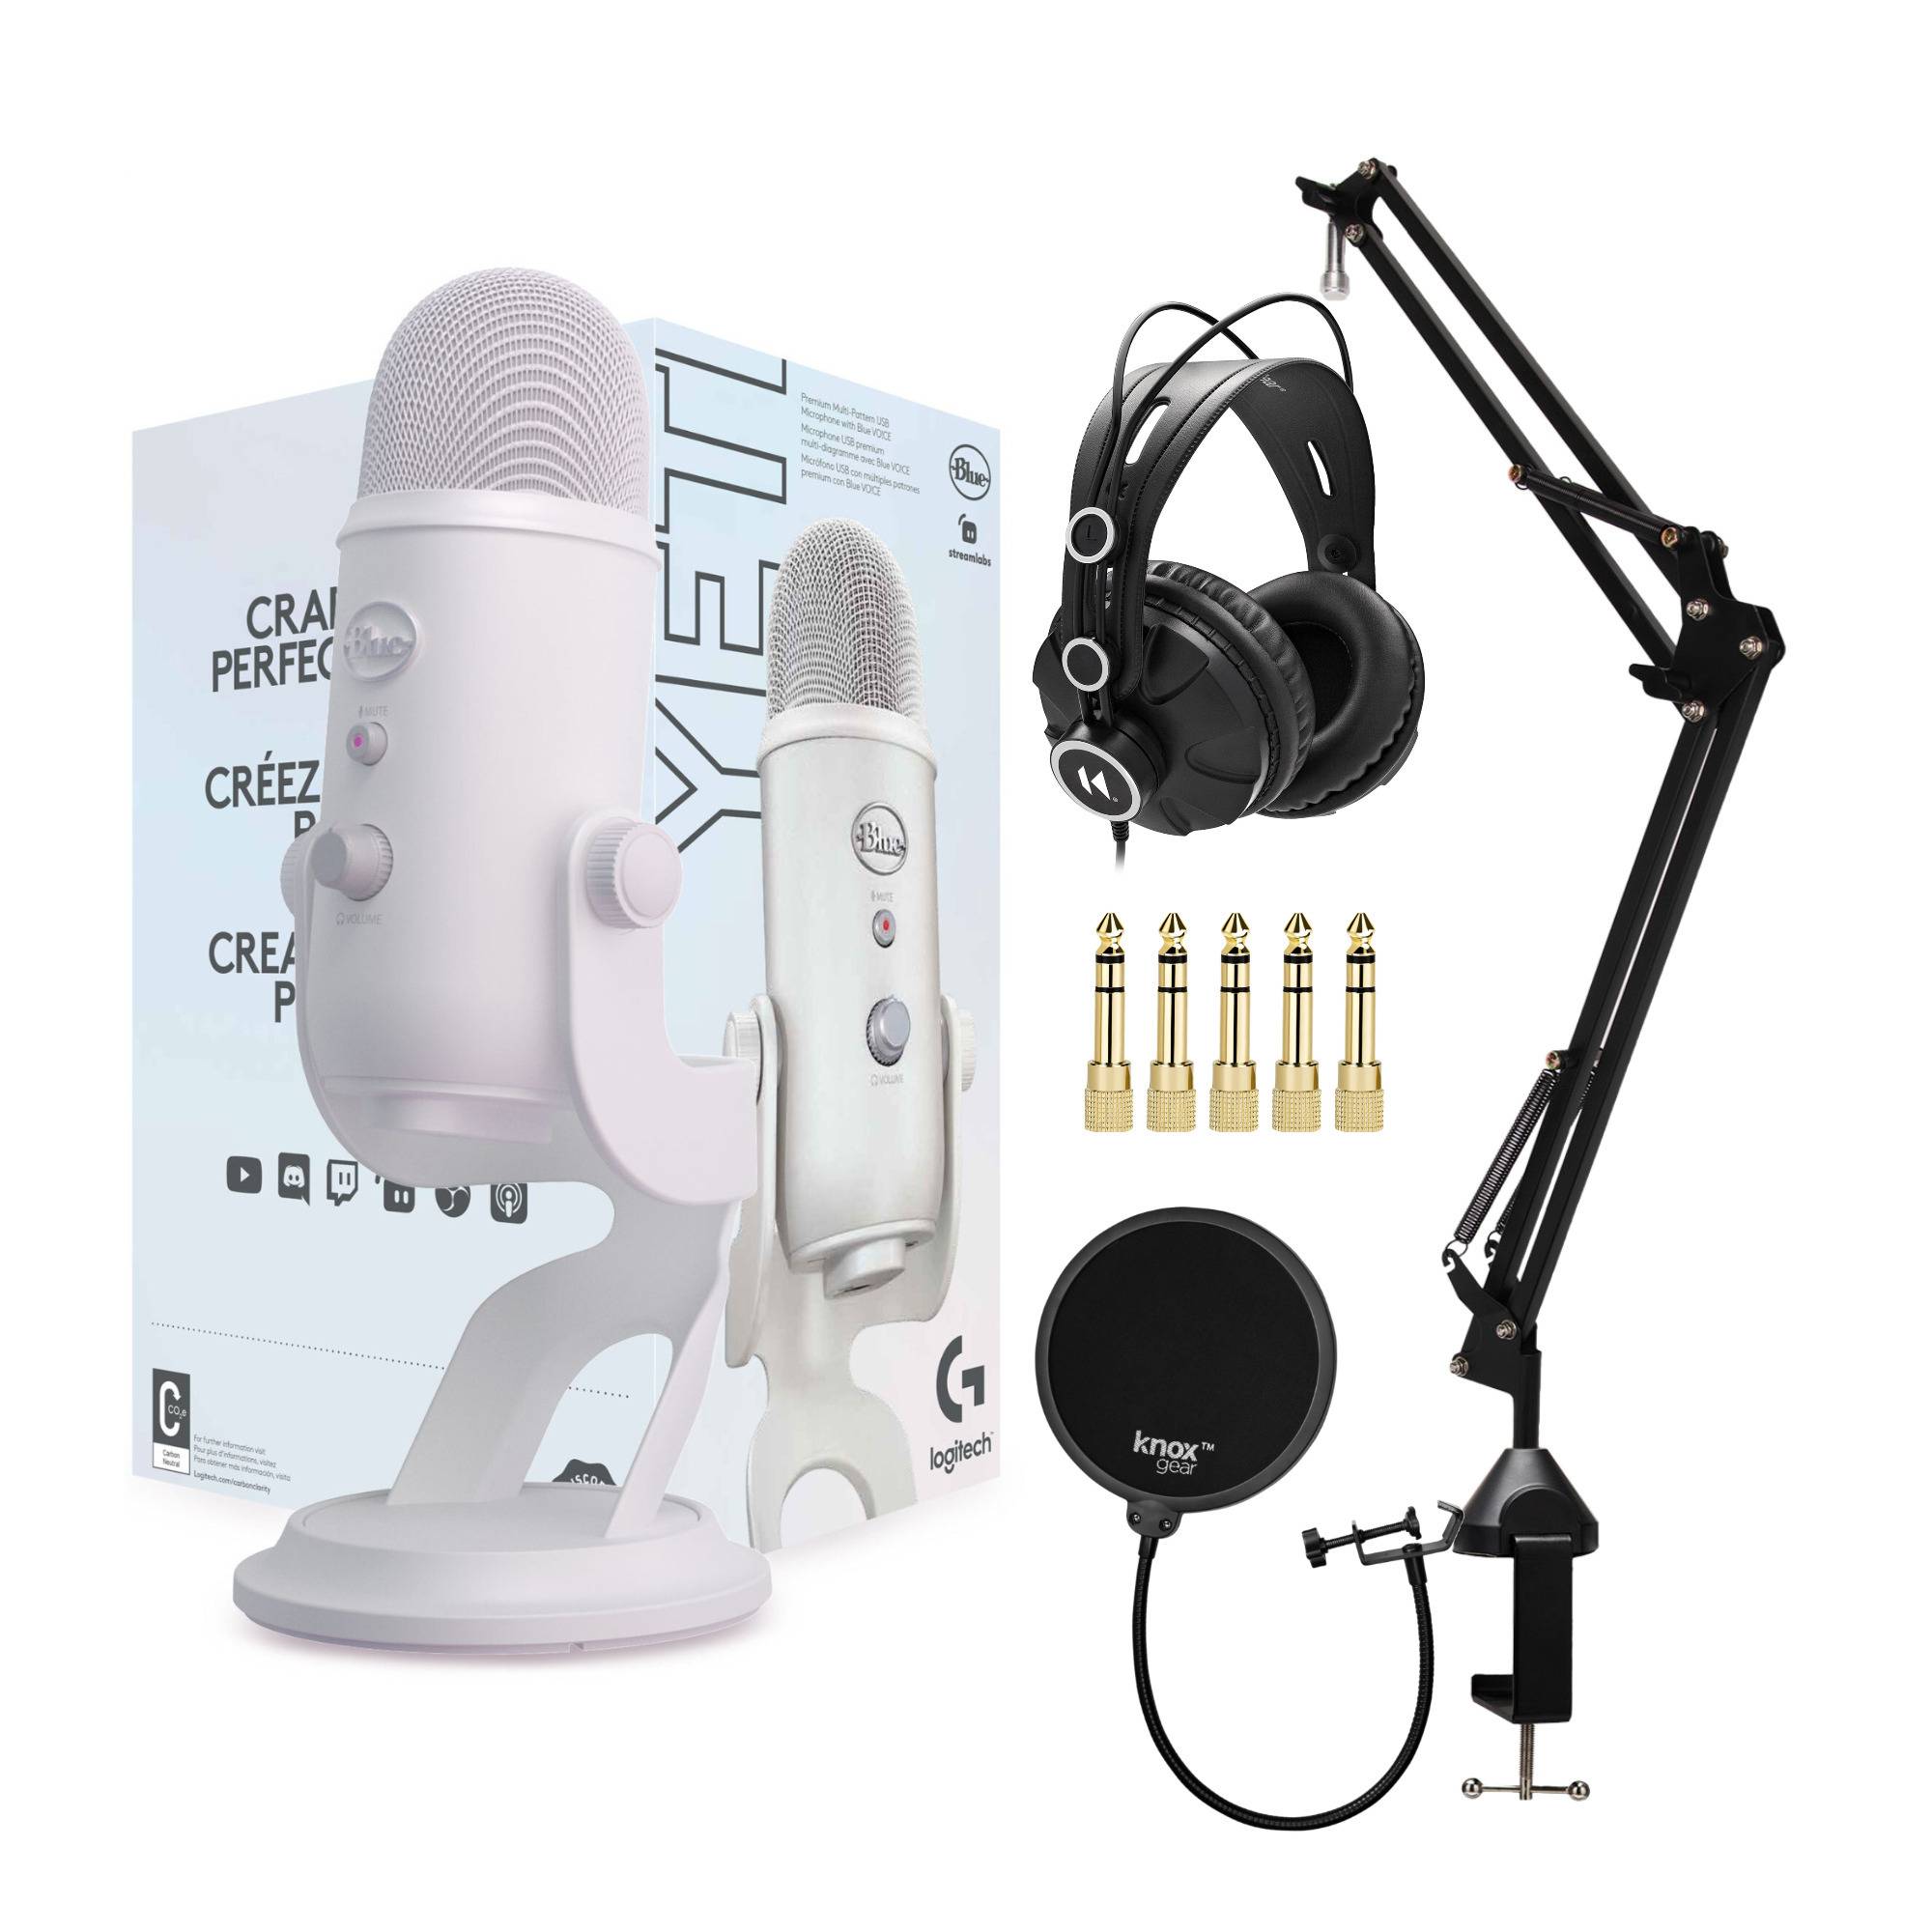 Blue Microphones Yeti USB Microphone (White Mist) with Microphone Stand, Headphones Bundle